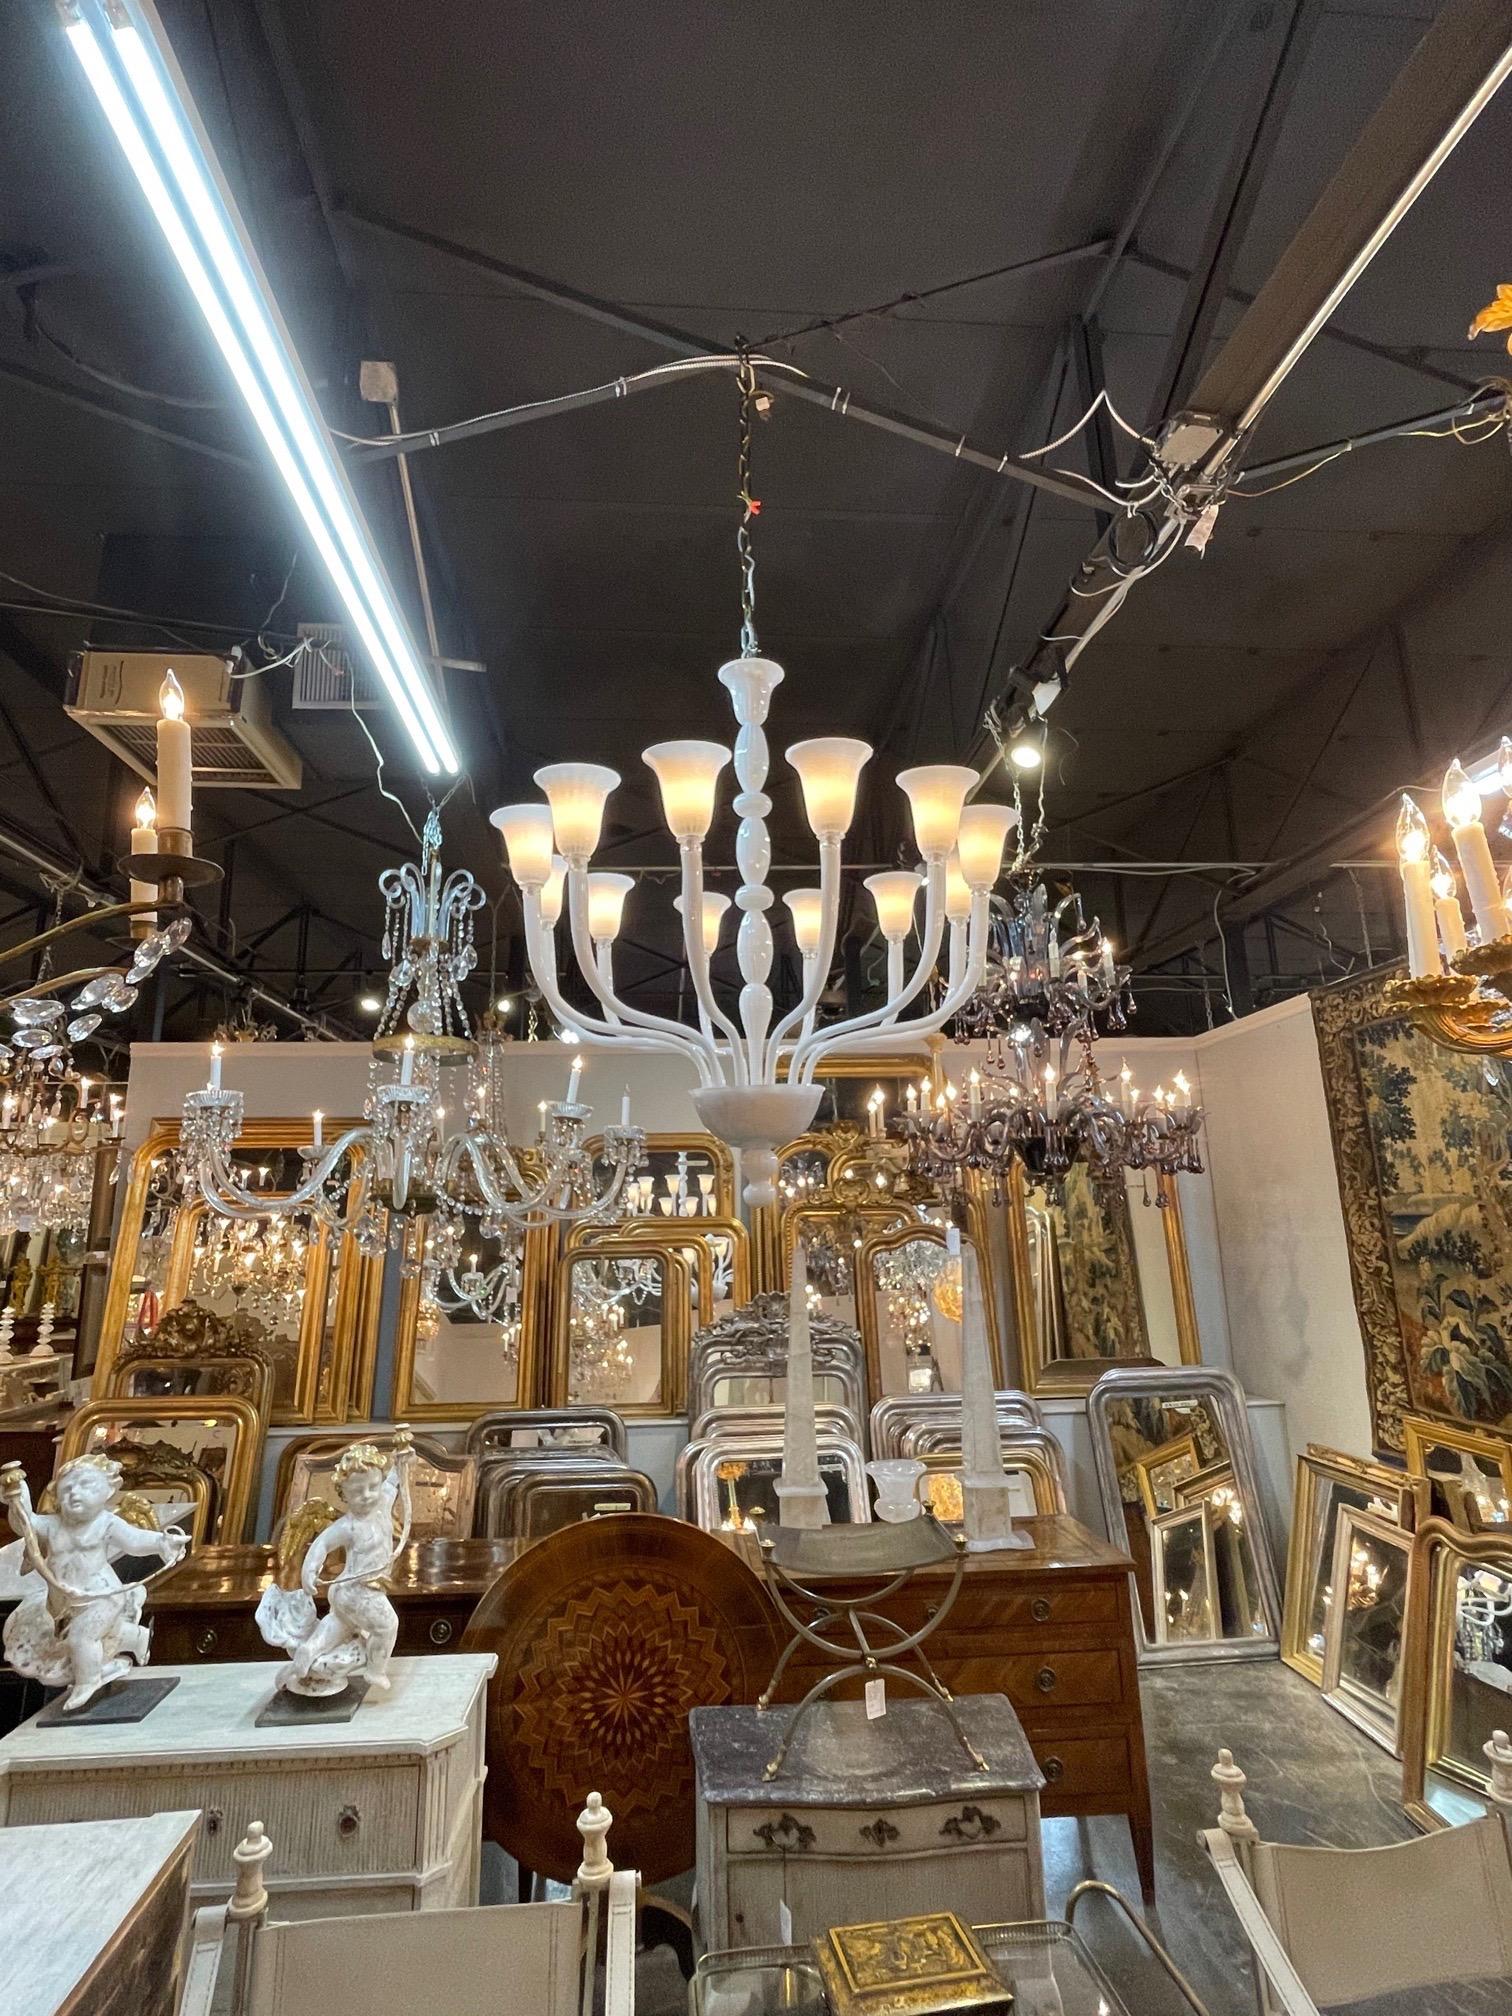 Large scale modern Murano glass chandelier with 12 lights. Interesting scale and shape to this along with beautiful milky white glass. Stunning!!